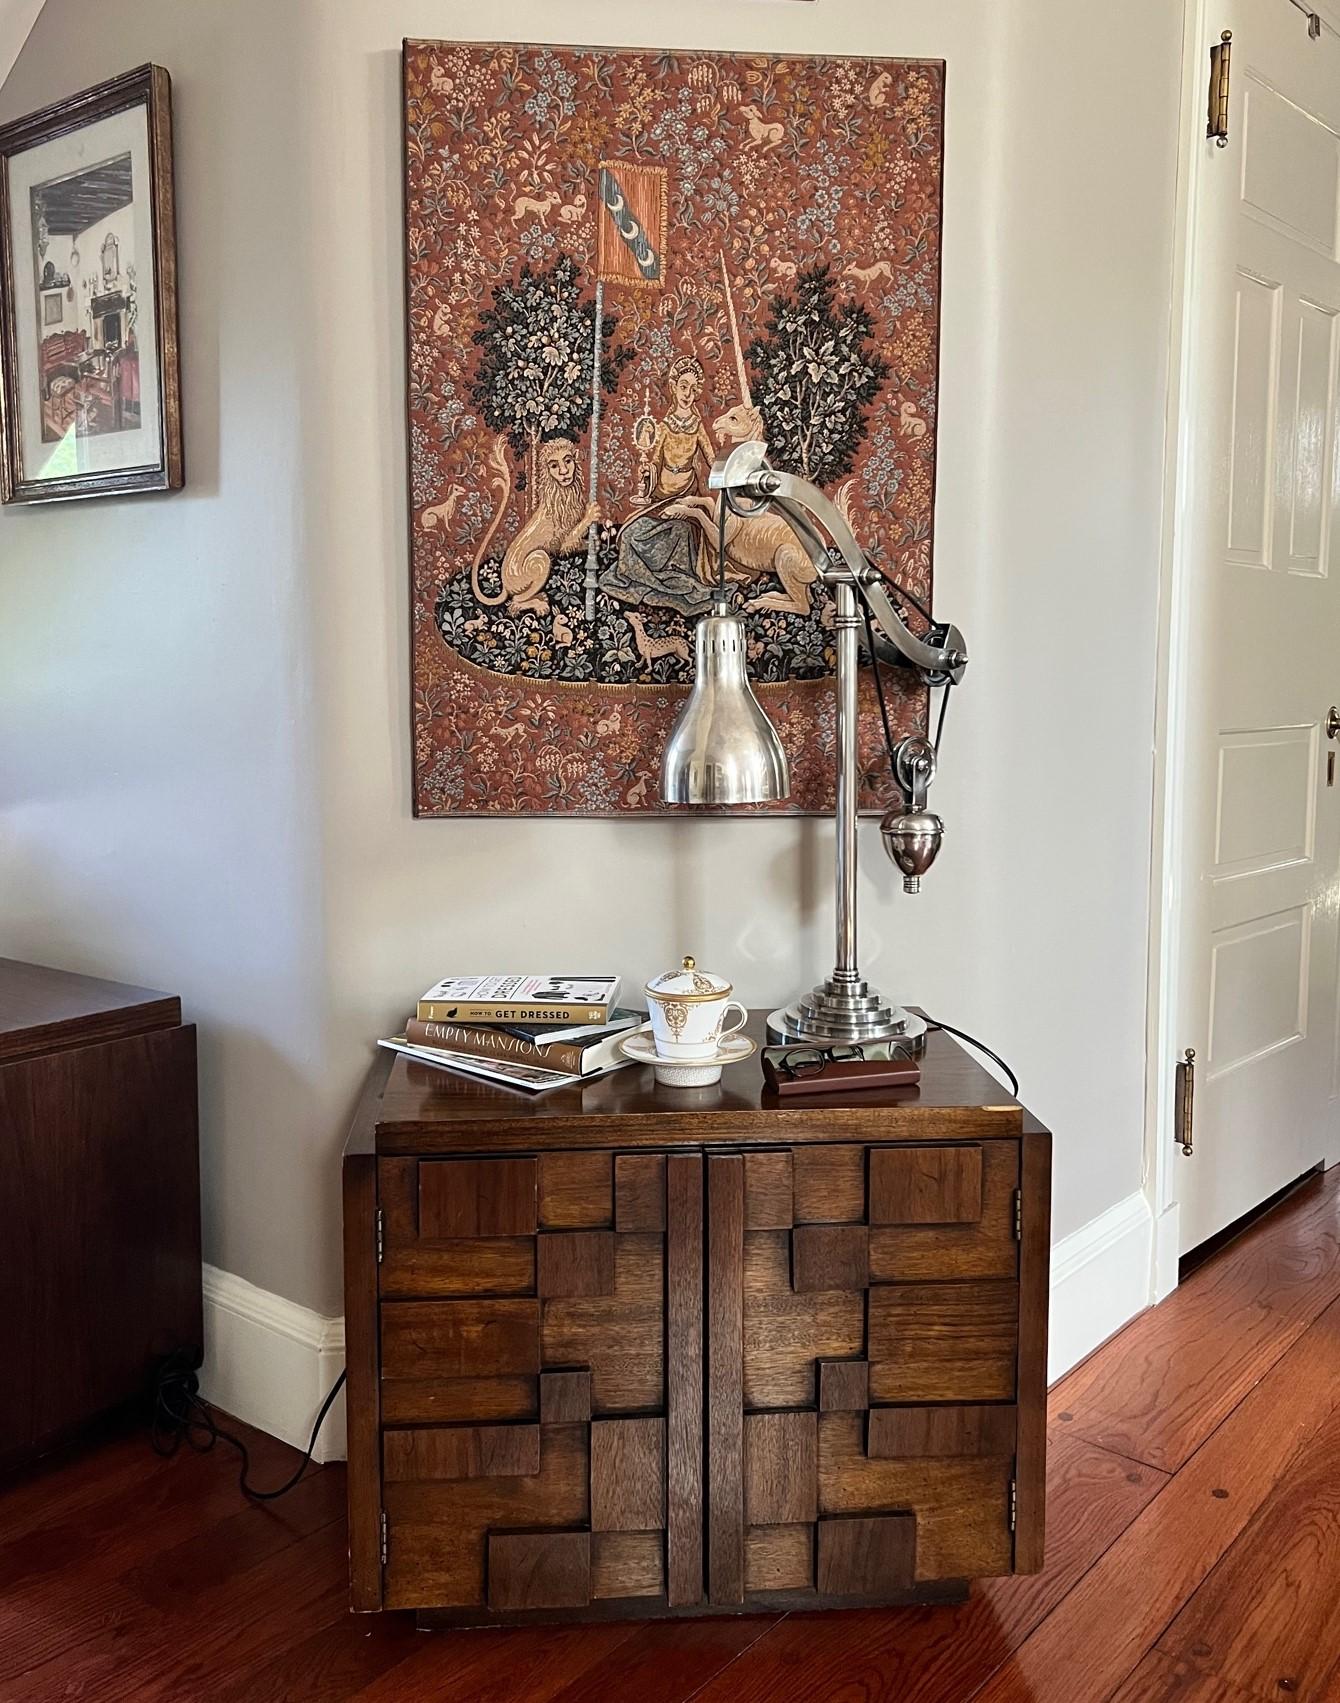 Mid 20th C., a pair of nightstands from the Staccato range by Lane in walnut. The structure of this range showcases the grain of the walnut beautifully. Each has two doors opening to an adjustable shelf.

This striking furniture was introduced in